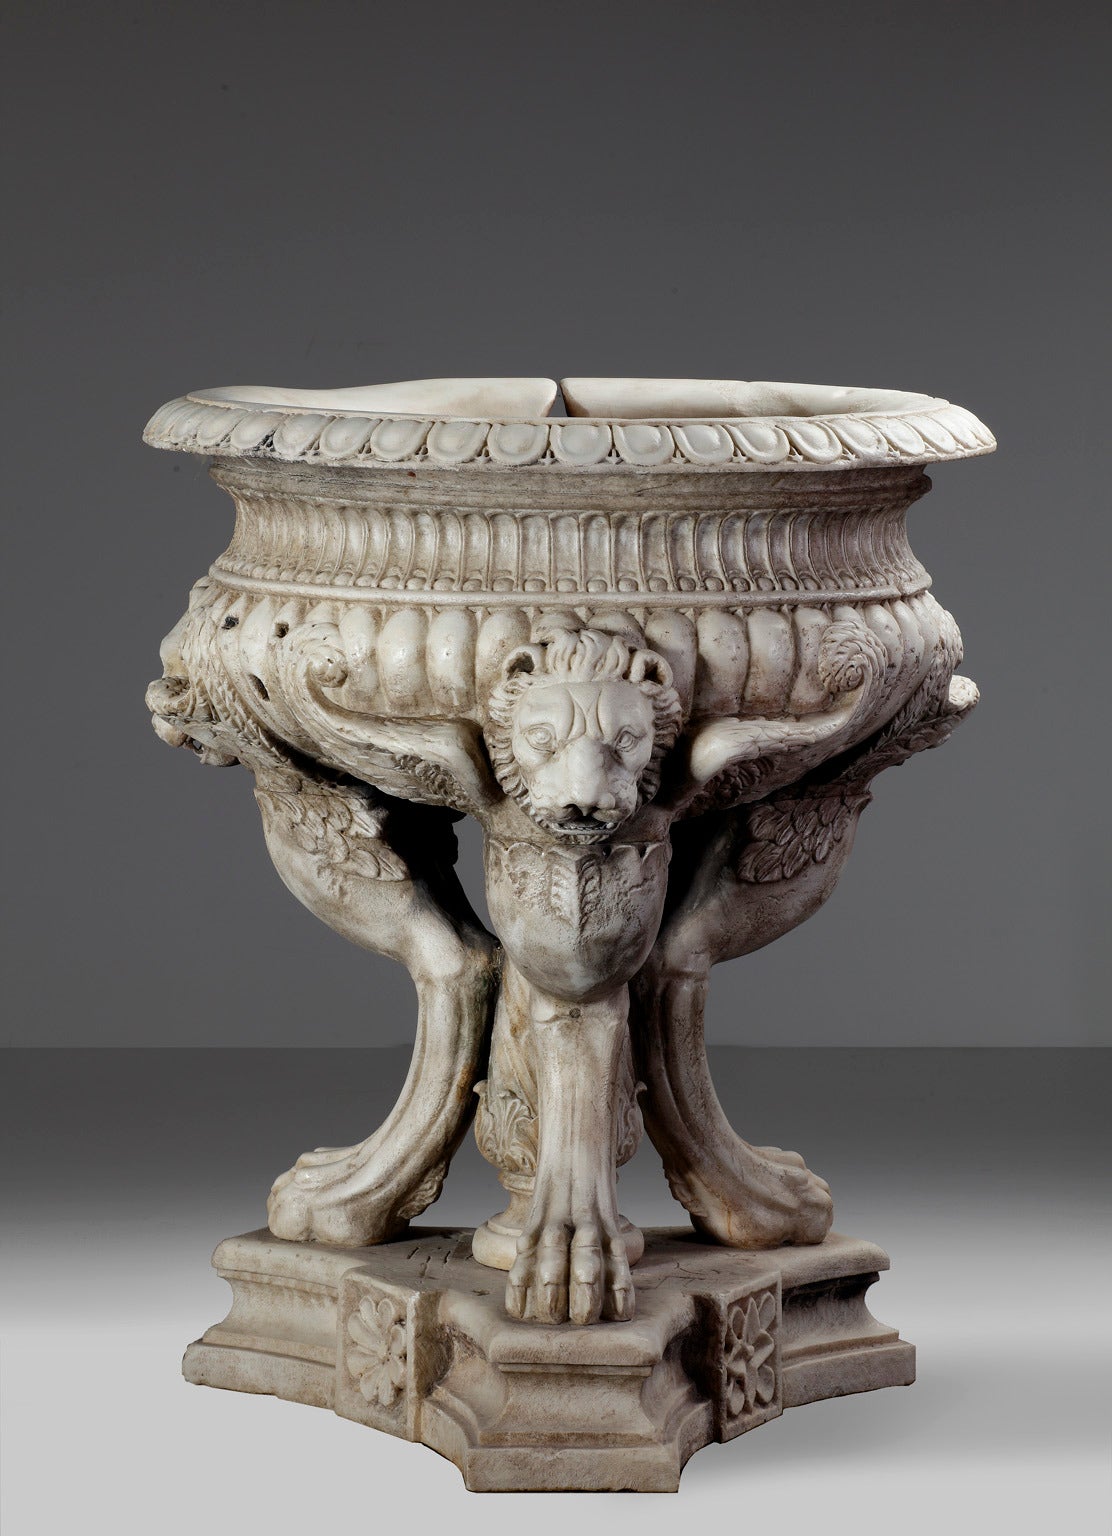 The everted rim above a waisted and fluted band, the lobed underside supported on the spread wings of three adorsed monopodial lions, around a central spiral carved supporting column, the triform base with waisted sides.

The planter is almost